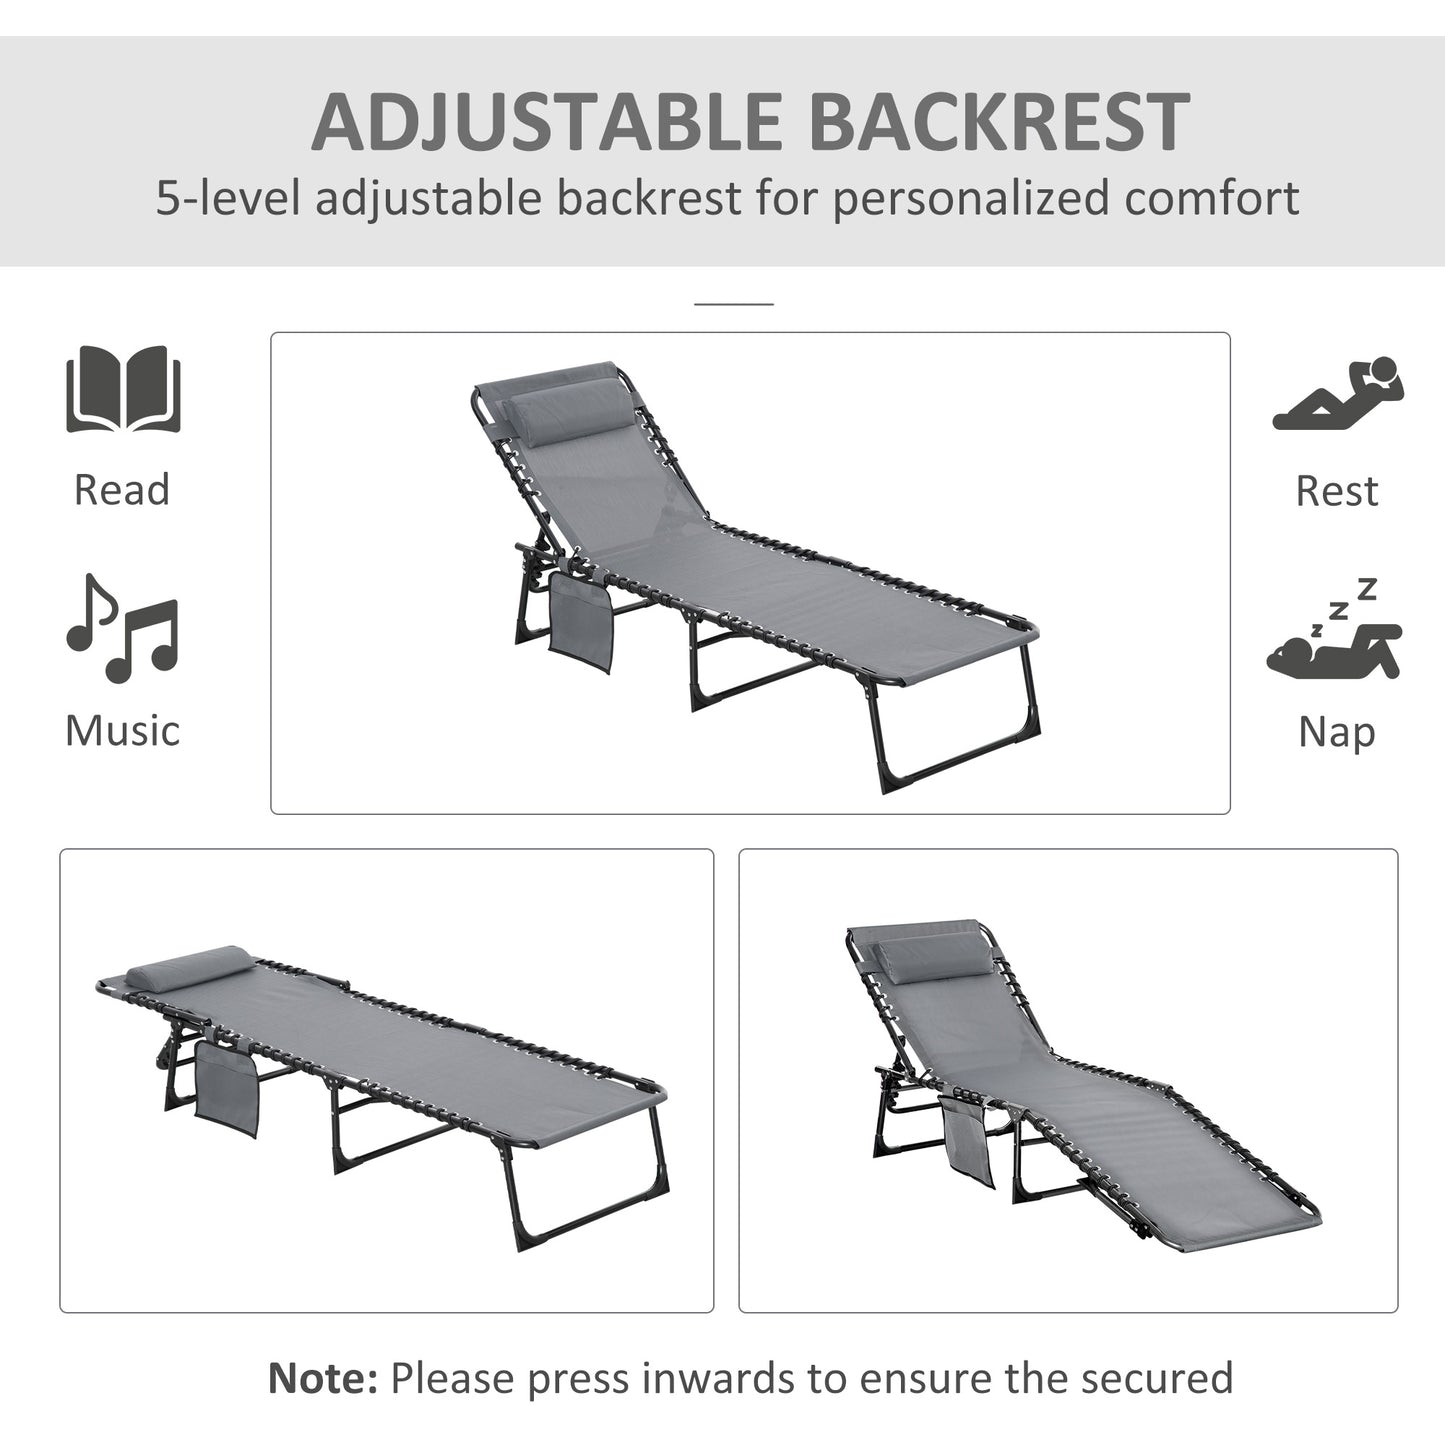 Outsunny Portable Sun Lounger Set of 2, Folding Camping Bed Cot, Reclining Lounge Chair 5-position Adjustable Backrest with Side Pocket, Pillow for Patio Garden Beach Pool, Grey